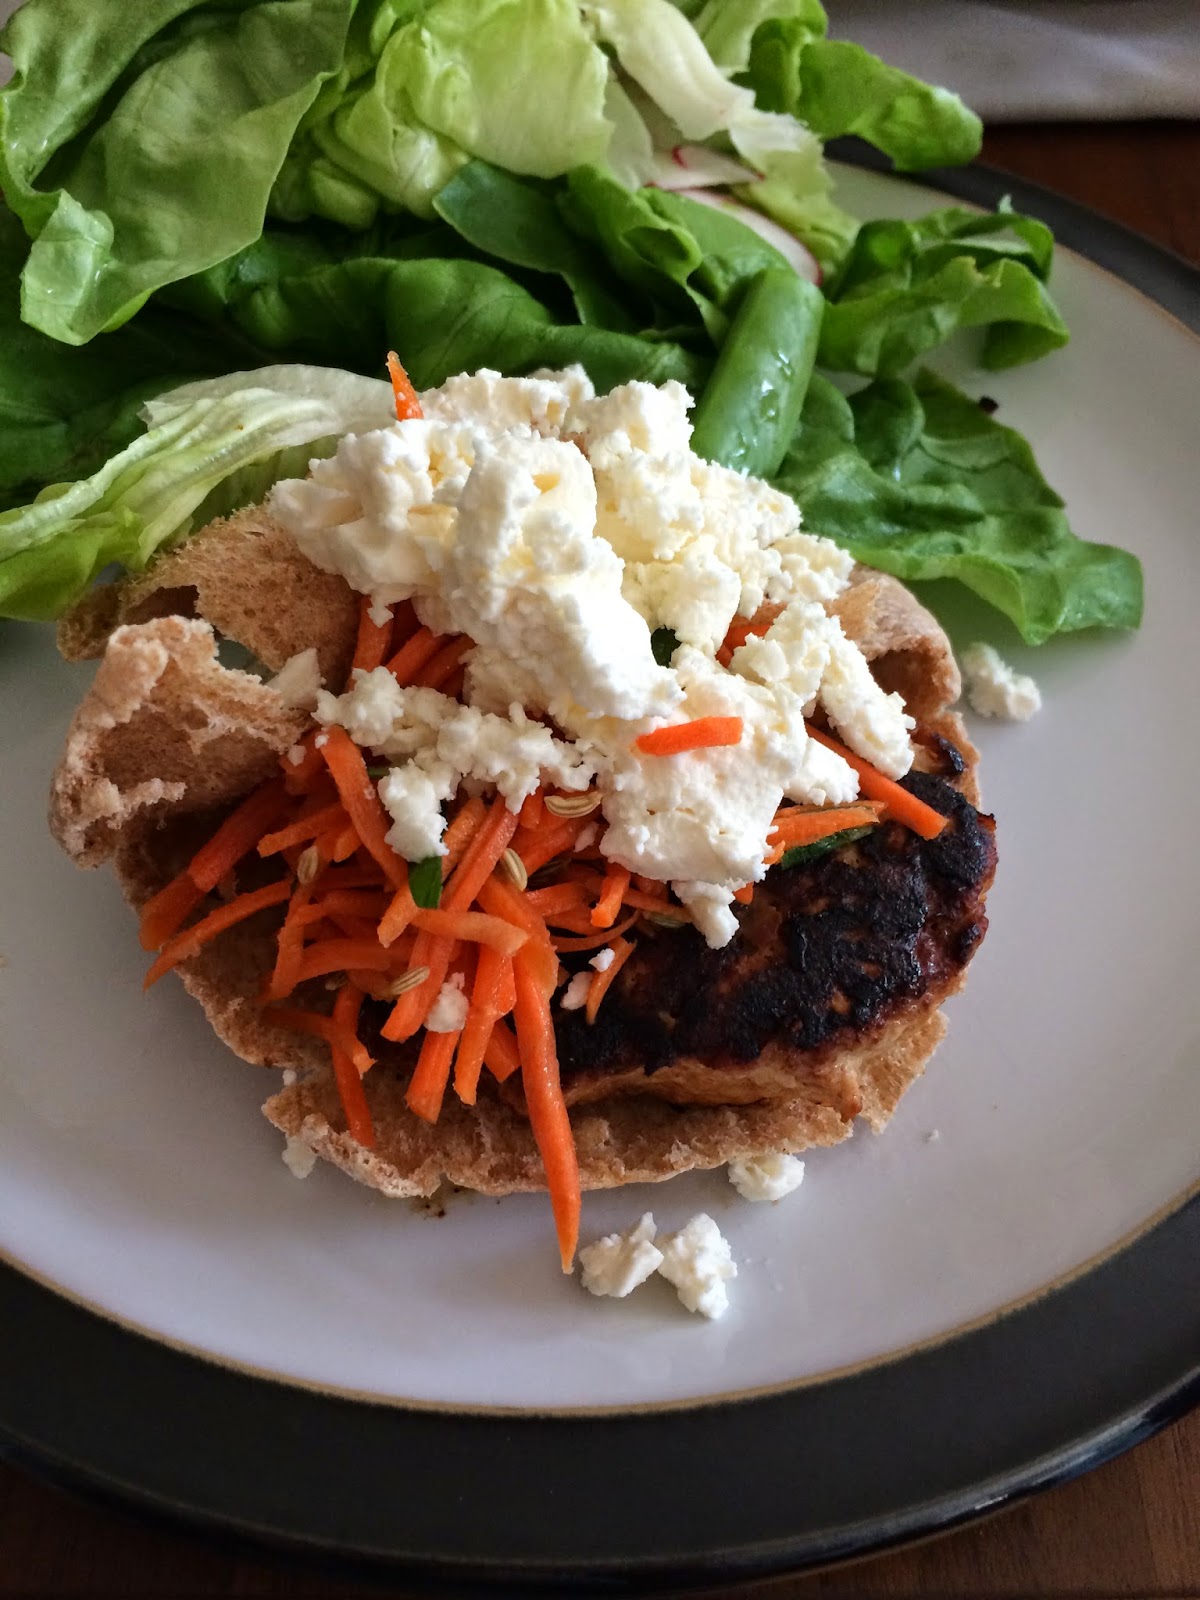 Moroccan Chicken Burgers With Feta And Carrot Slaw Recipe | Useful Weight Loss Ideas